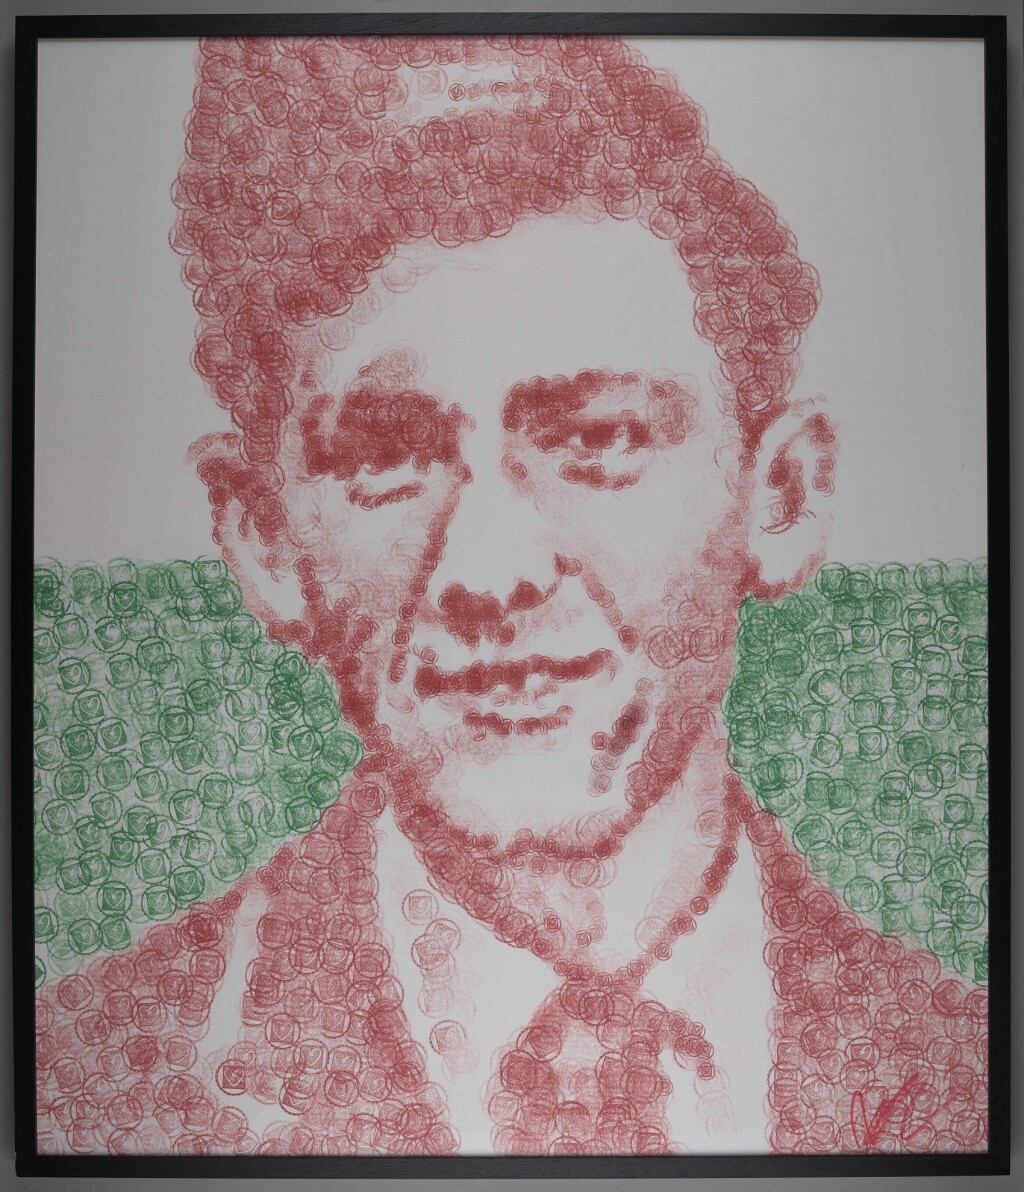 Portrait of Terrence Higgins made out of red and green heart shaped stamp 